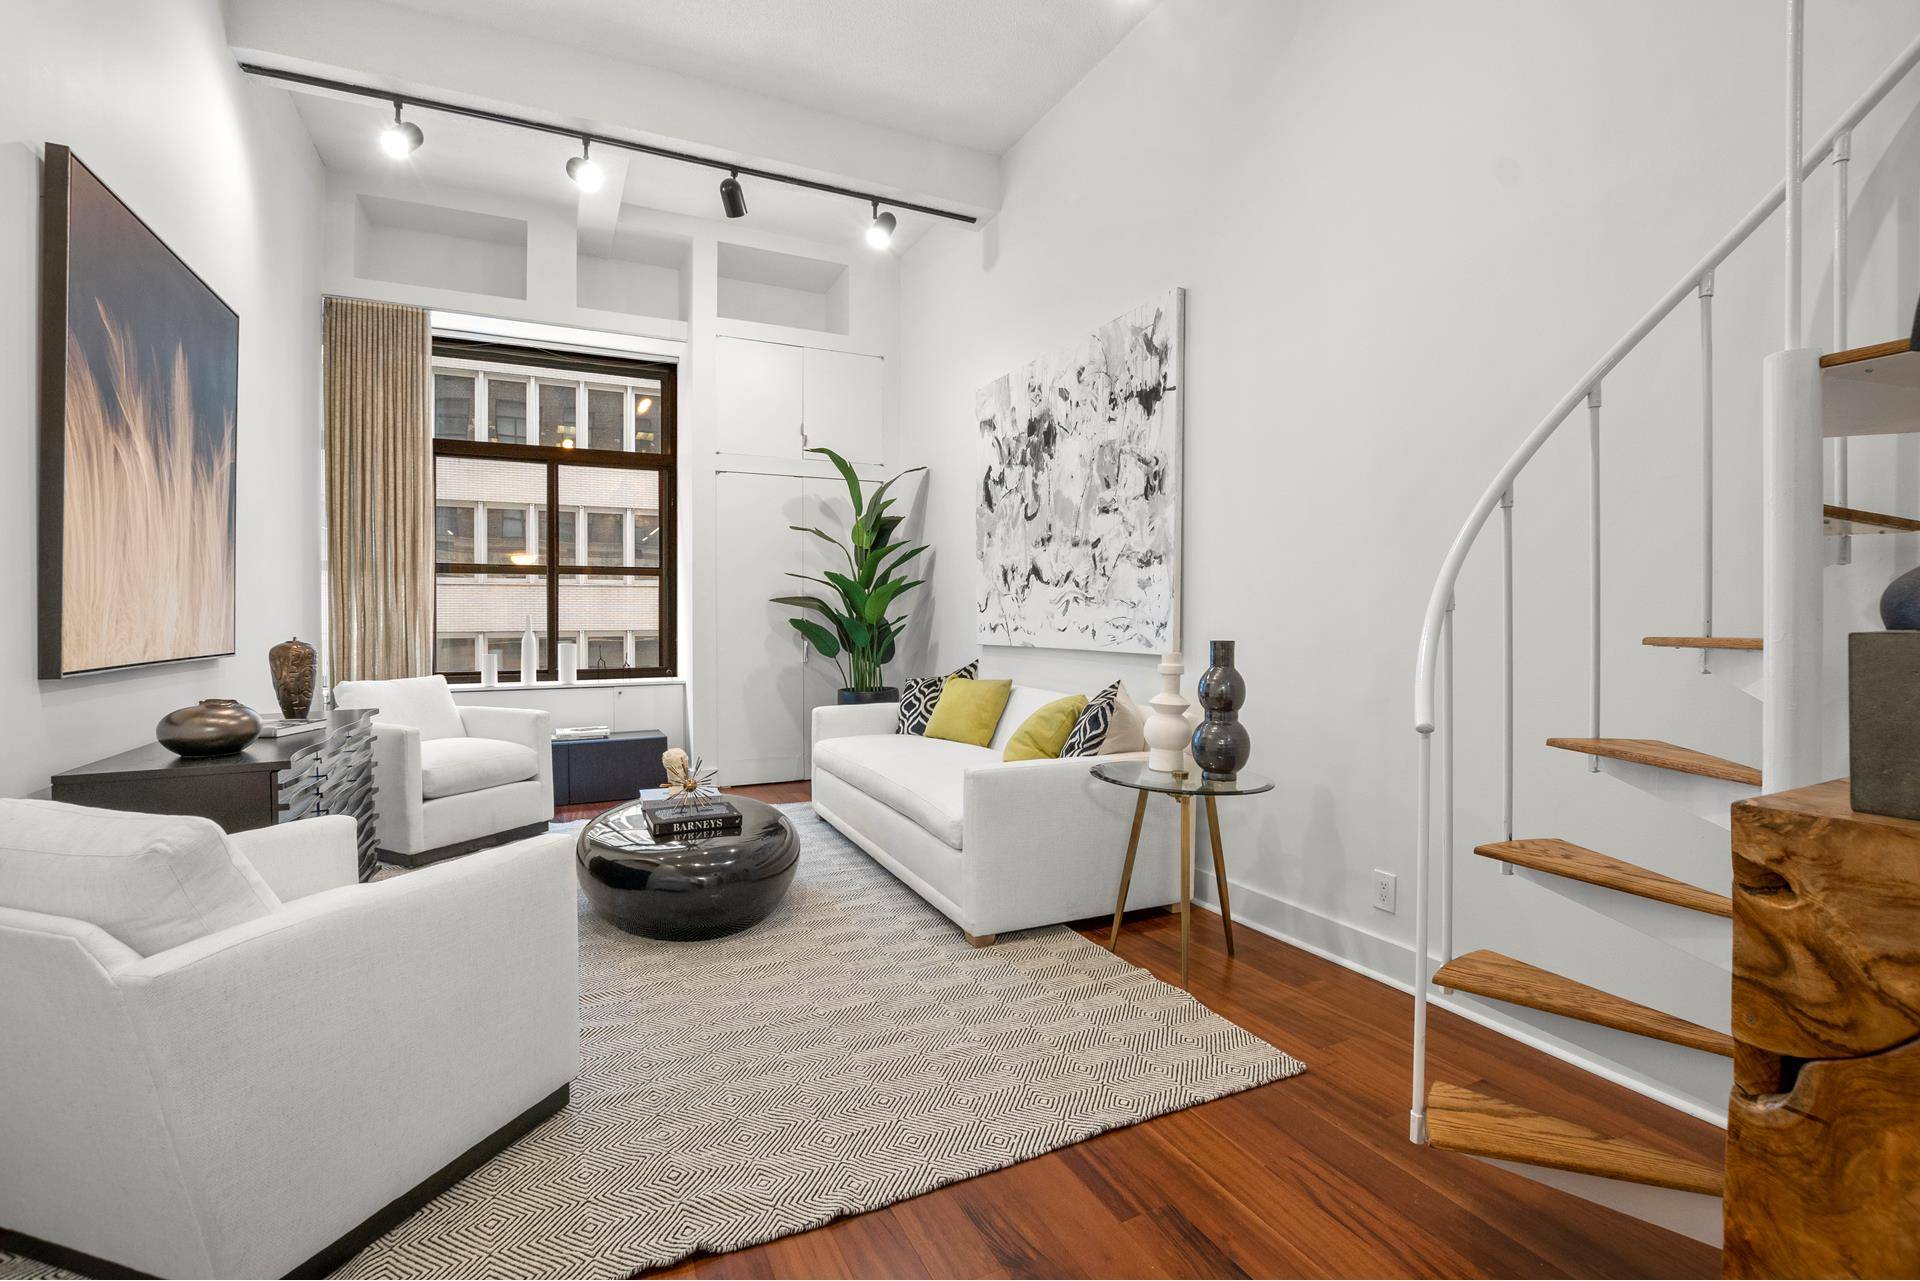 DOWNTOWN LOFT LIVING COMES TO MIDTOWN !